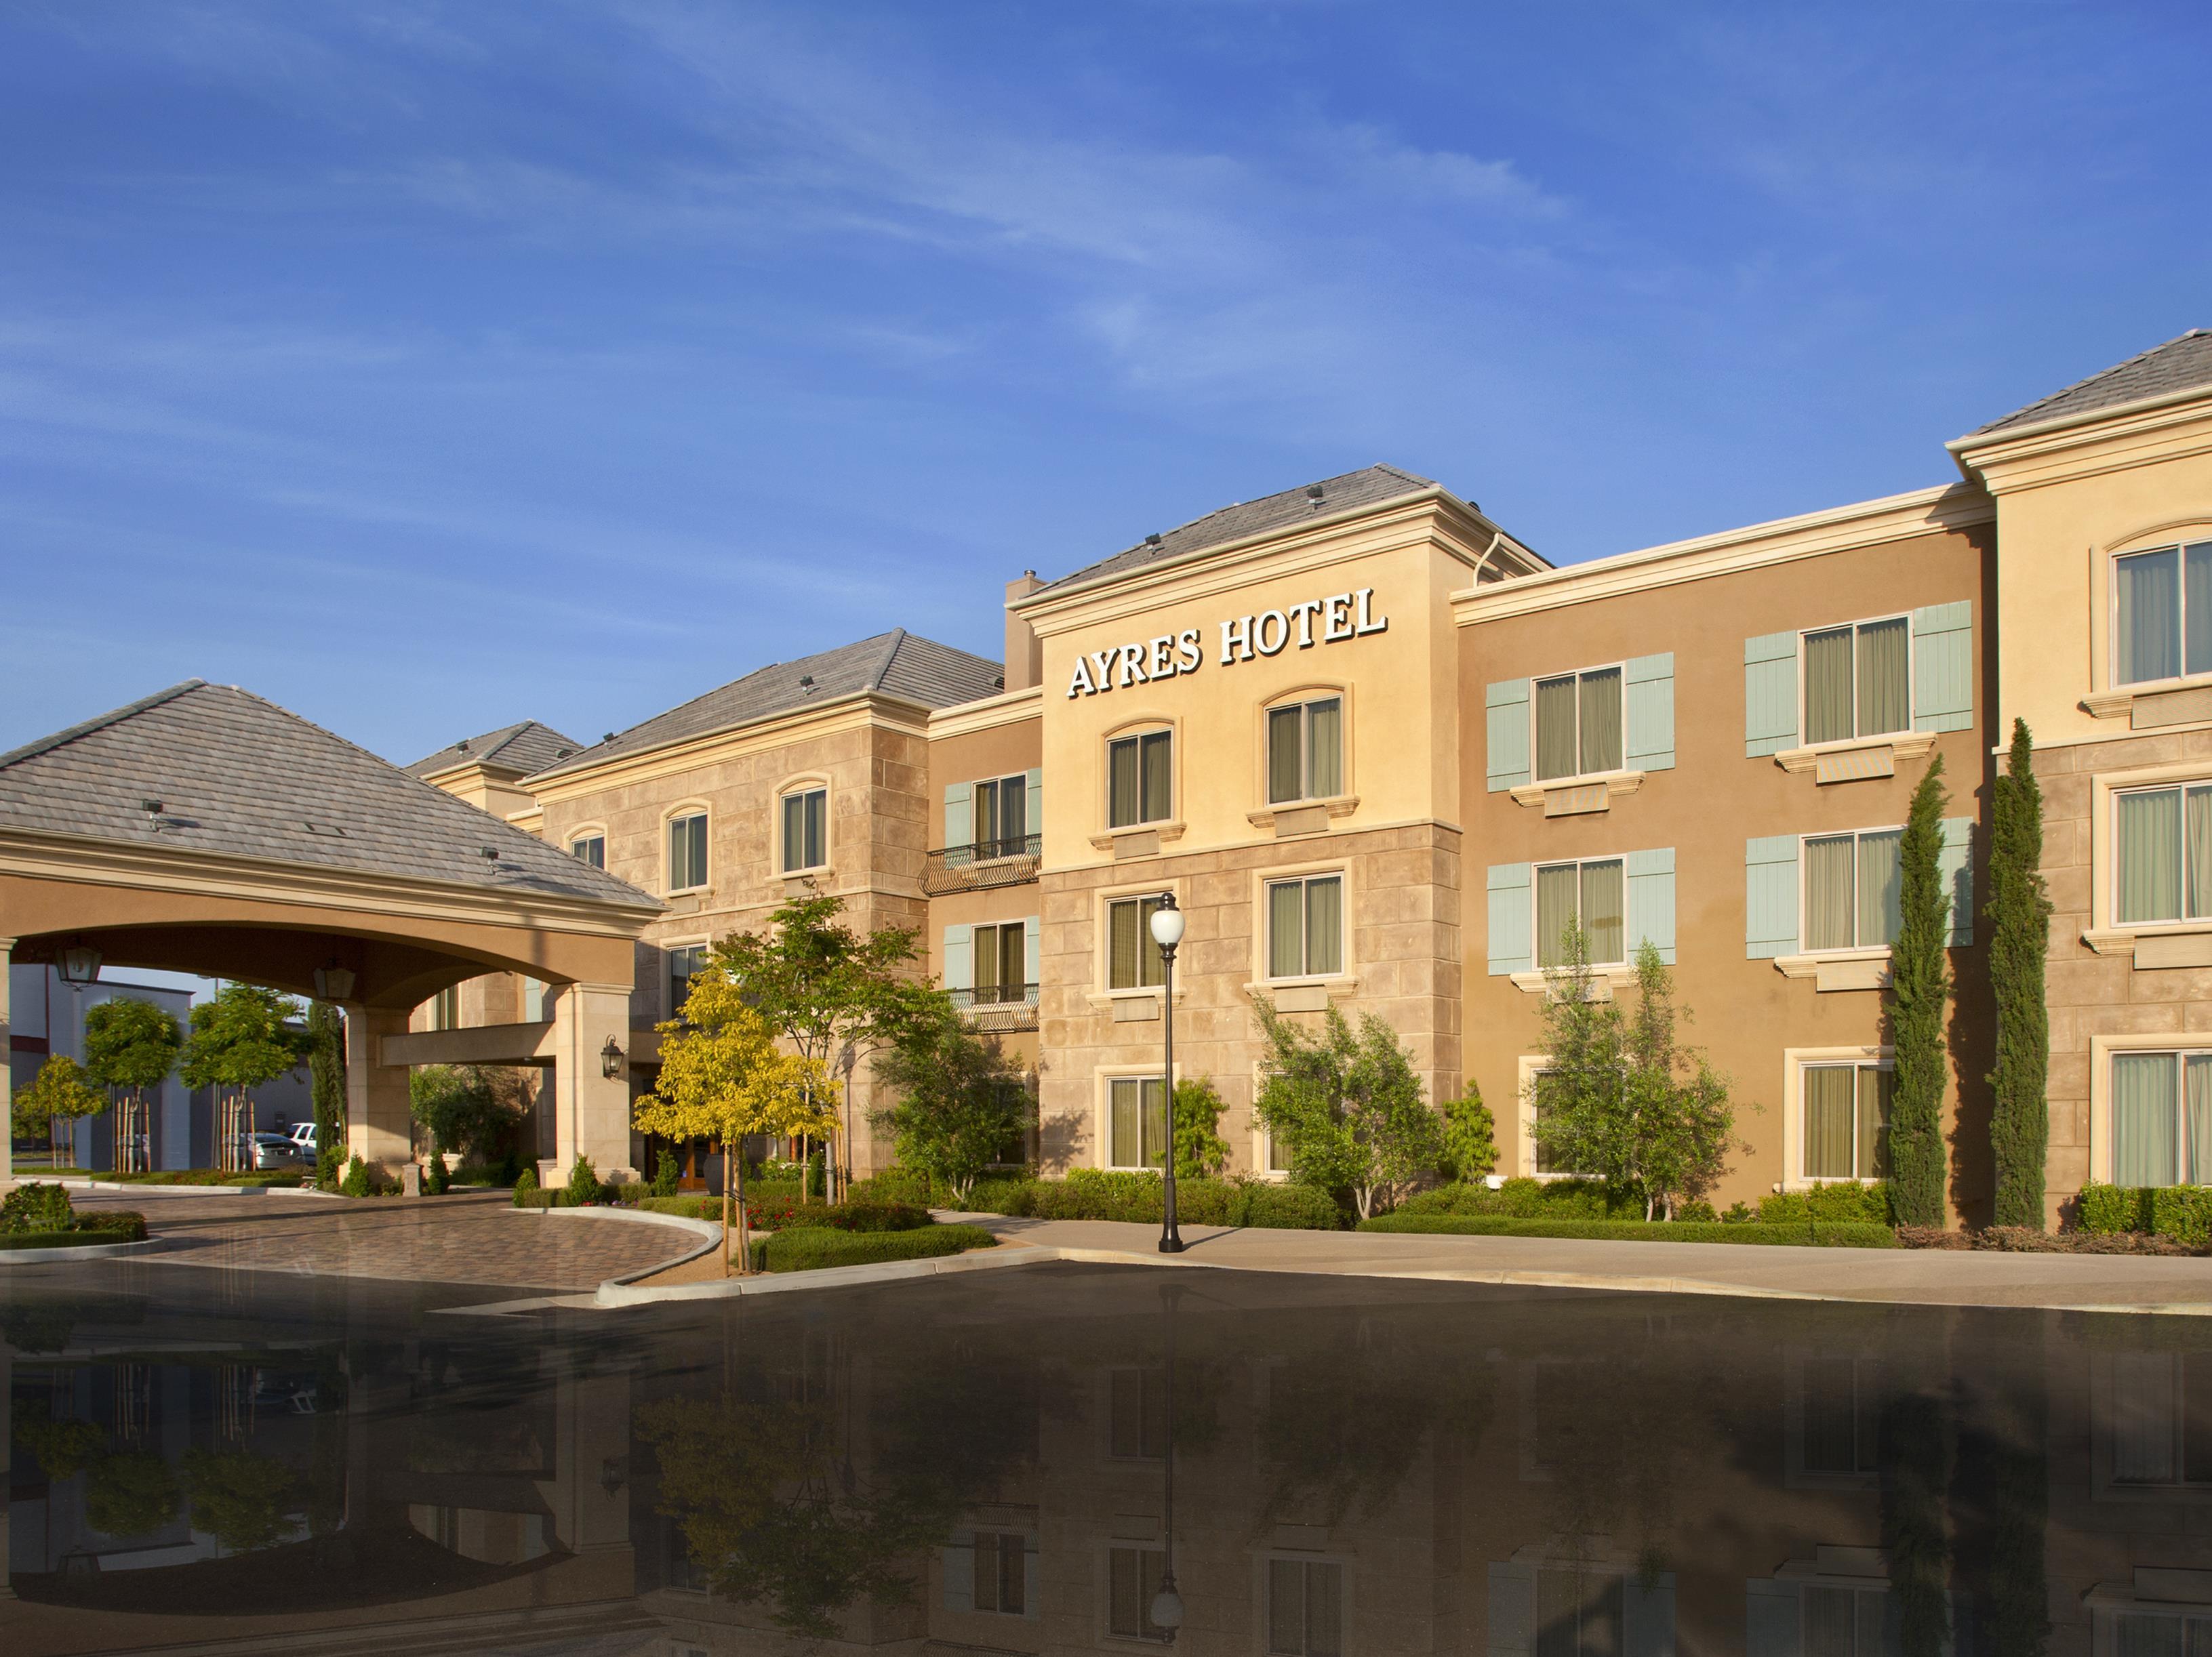 Ayres Hotel Chino Hills Hachinohe City 
 FAQ 2016, What facilities are there in Ayres Hotel Chino Hills Hachinohe City 
 2016, What Languages Spoken are Supported in Ayres Hotel Chino Hills Hachinohe City 
 2016, Which payment cards are accepted in Ayres Hotel Chino Hills Hachinohe City 
 , Hachinohe City 
 Ayres Hotel Chino Hills room facilities and services Q&A 2016, Hachinohe City 
 Ayres Hotel Chino Hills online booking services 2016, Hachinohe City 
 Ayres Hotel Chino Hills address 2016, Hachinohe City 
 Ayres Hotel Chino Hills telephone number 2016,Hachinohe City 
 Ayres Hotel Chino Hills map 2016, Hachinohe City 
 Ayres Hotel Chino Hills traffic guide 2016, how to go Hachinohe City 
 Ayres Hotel Chino Hills, Hachinohe City 
 Ayres Hotel Chino Hills booking online 2016, Hachinohe City 
 Ayres Hotel Chino Hills room types 2016.